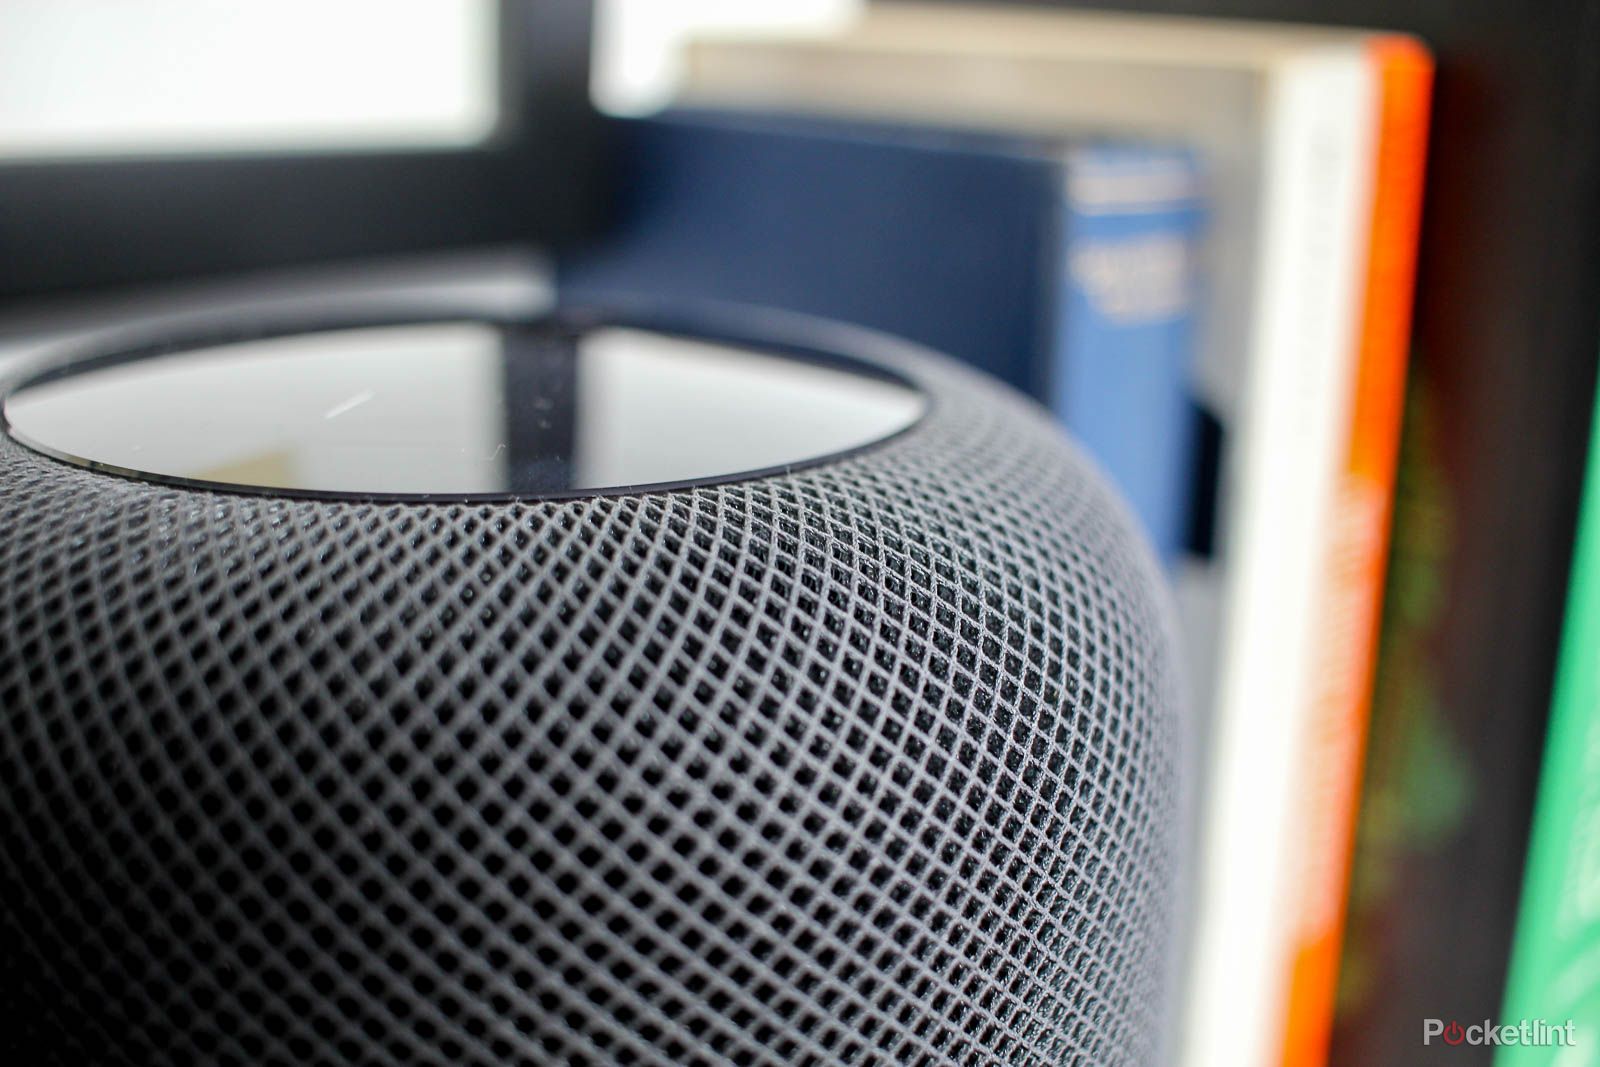 Apples HomePod is now available to order from John Lewis in the UK image 1